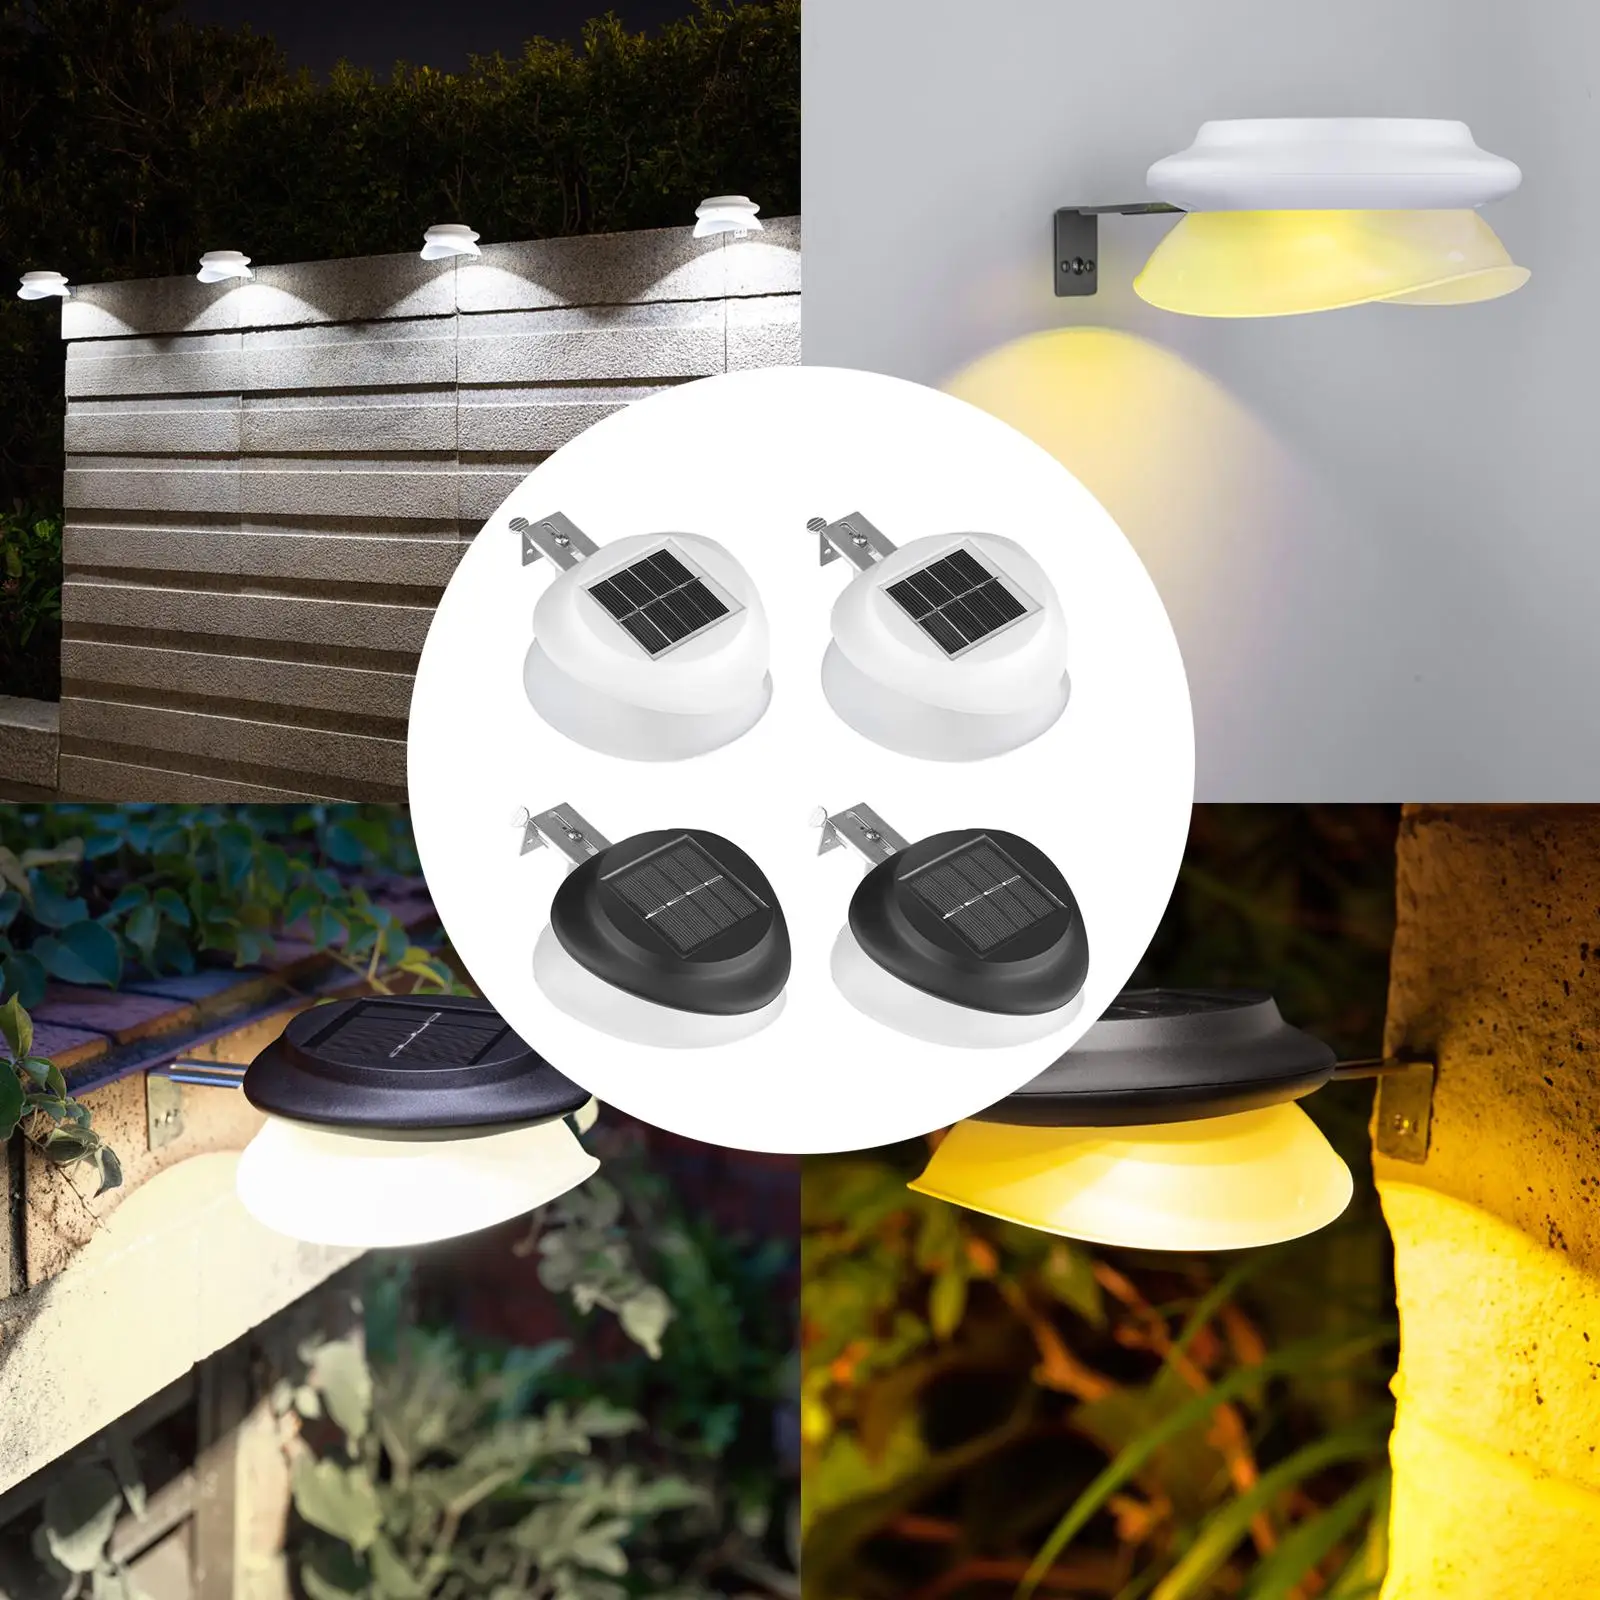 LED Solar Stair Lamp IP65 Waterproof Outdoor Garden Pathway Yard Patio Stairs Steps Fence Lamps Solar Night Light